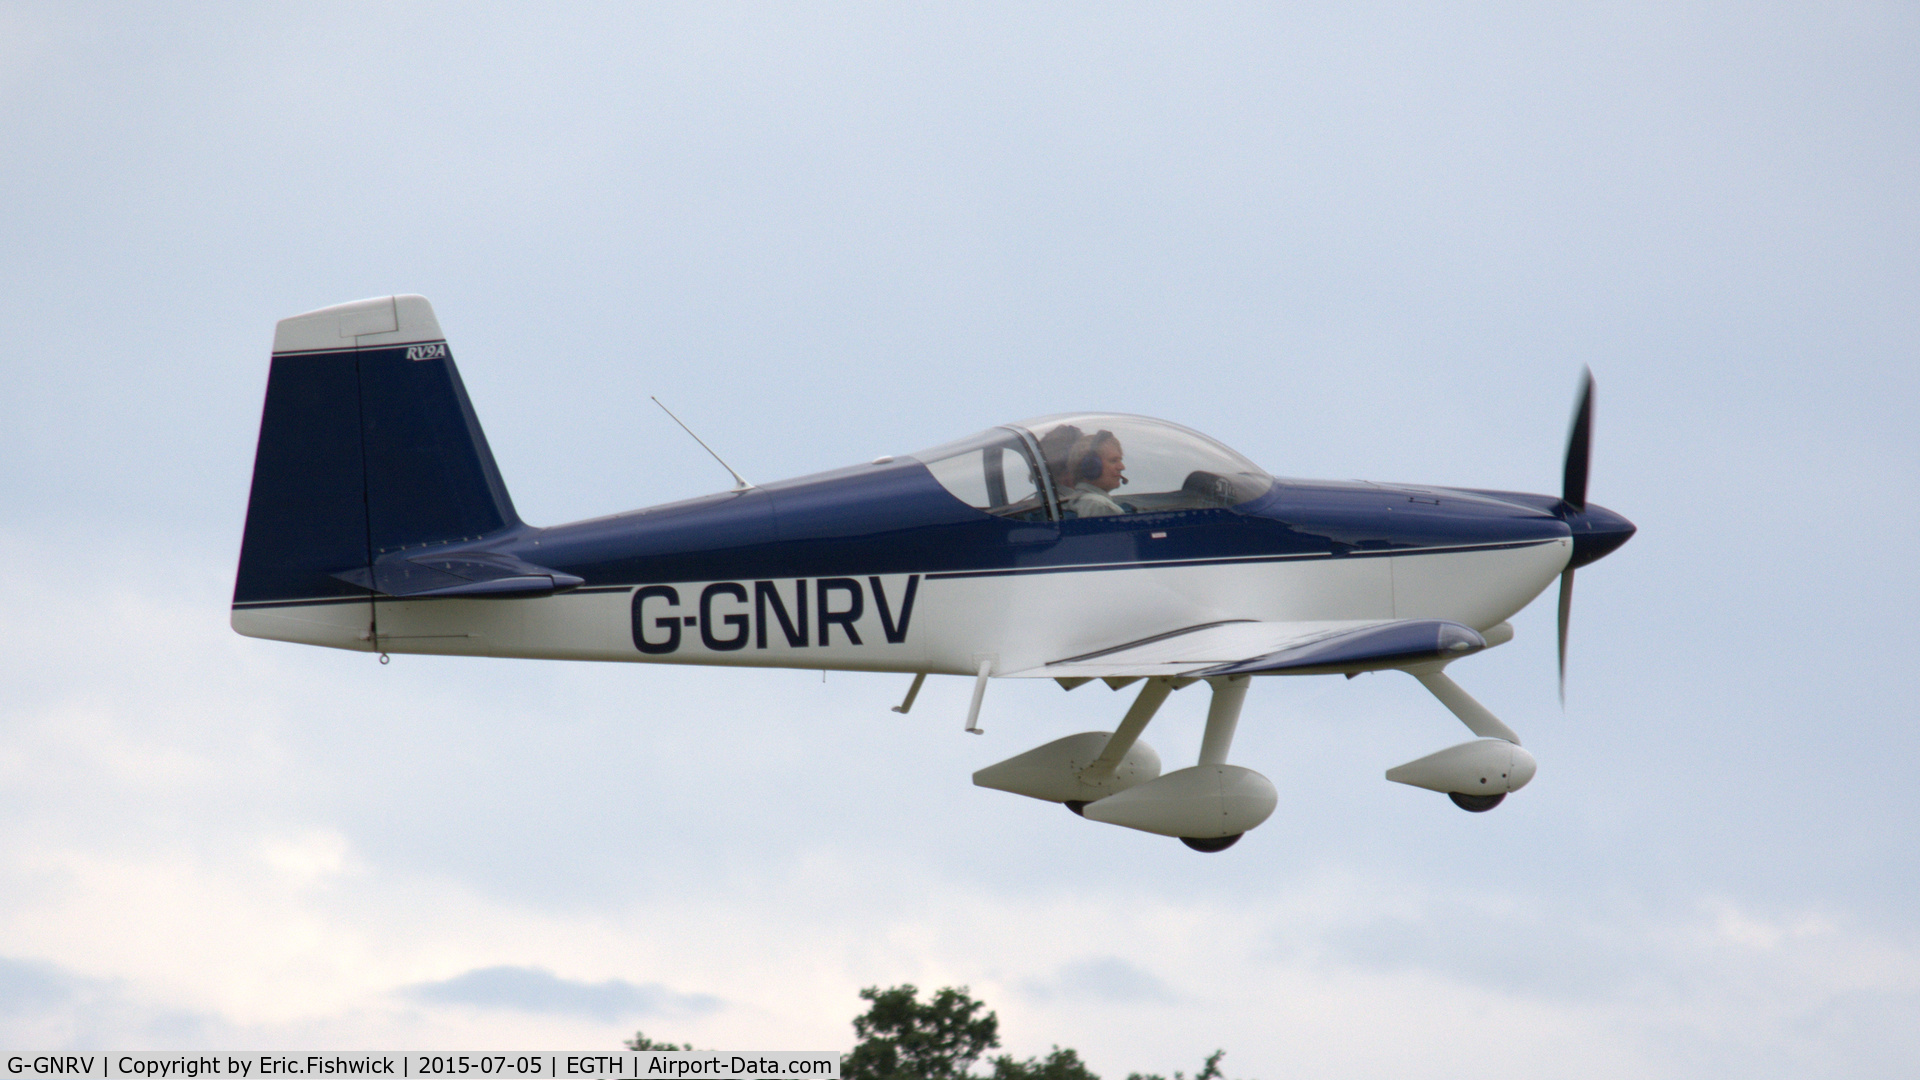 G-GNRV, 2005 Vans RV-9A C/N PFA 320-14344, 42. G-GNRV departing the Shuttleworth Military Pagent Airshow, July 2015.